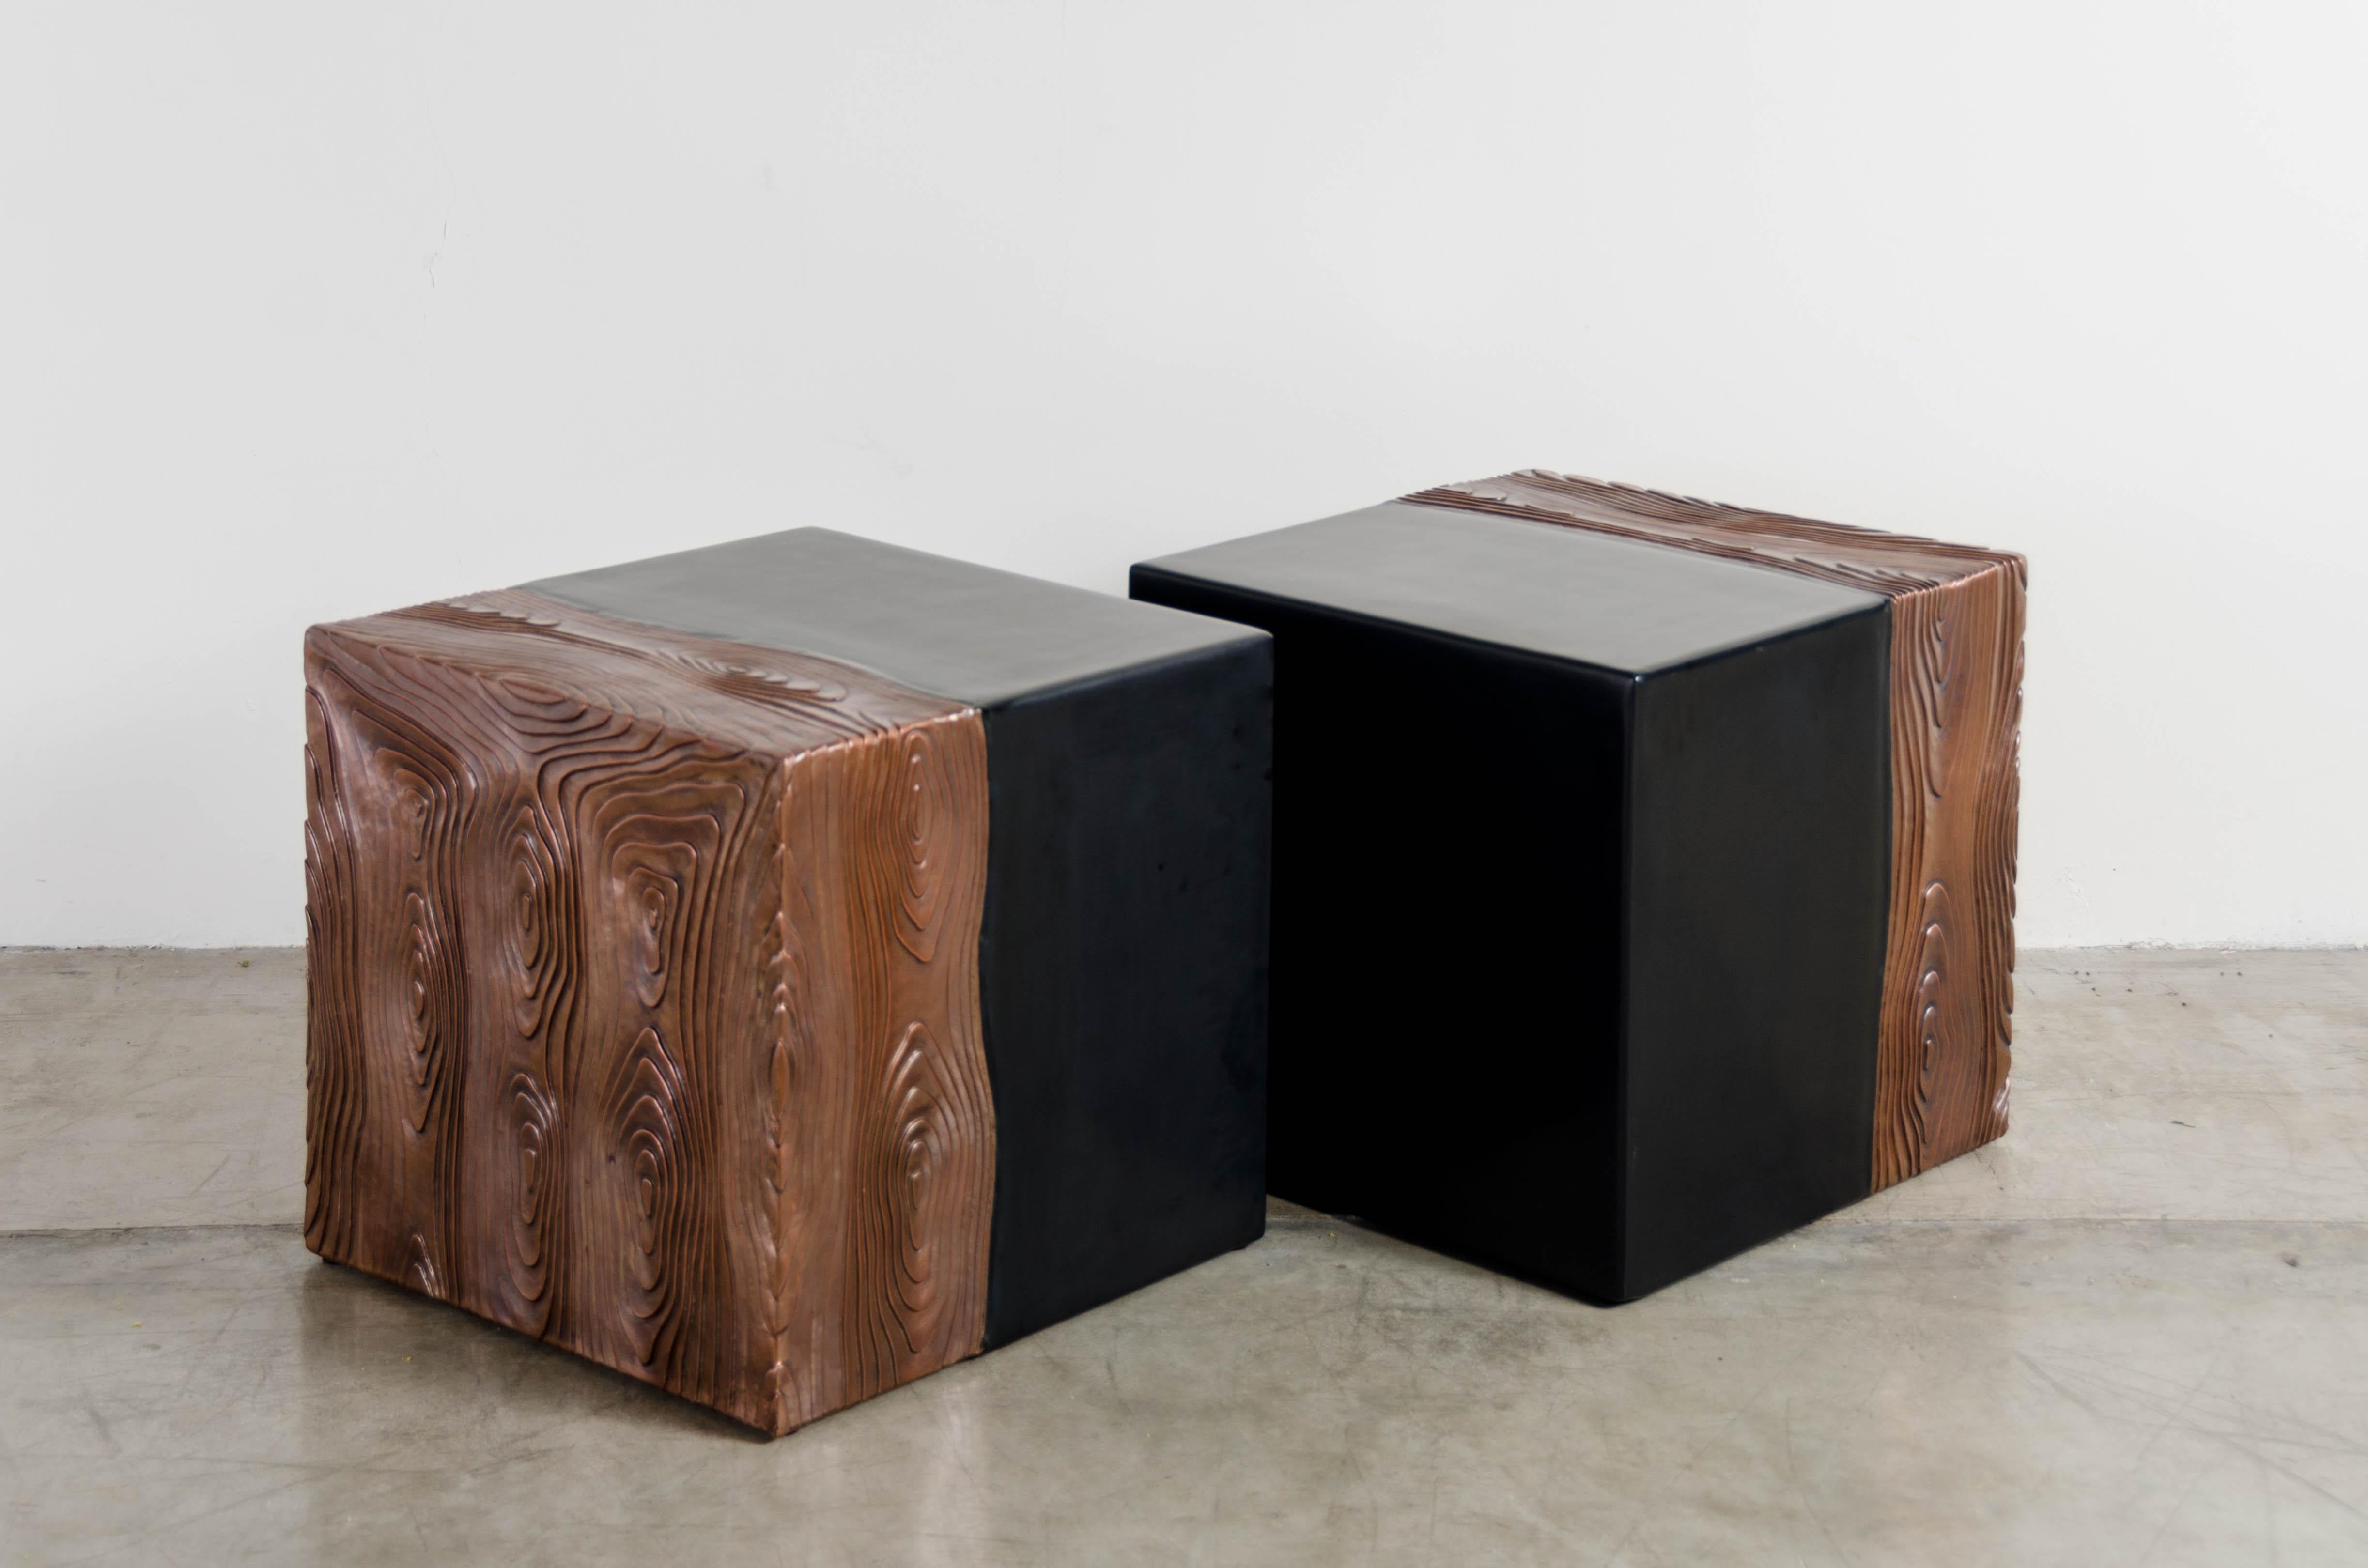 Square seat with woodgrain design
Black lacquer
Antique copper
Hand repousse
Limited edition
Each piece is individually crafted and is unique.

Repousse´ is the traditional art of hand-hammering decorative relief onto sheet metal. The